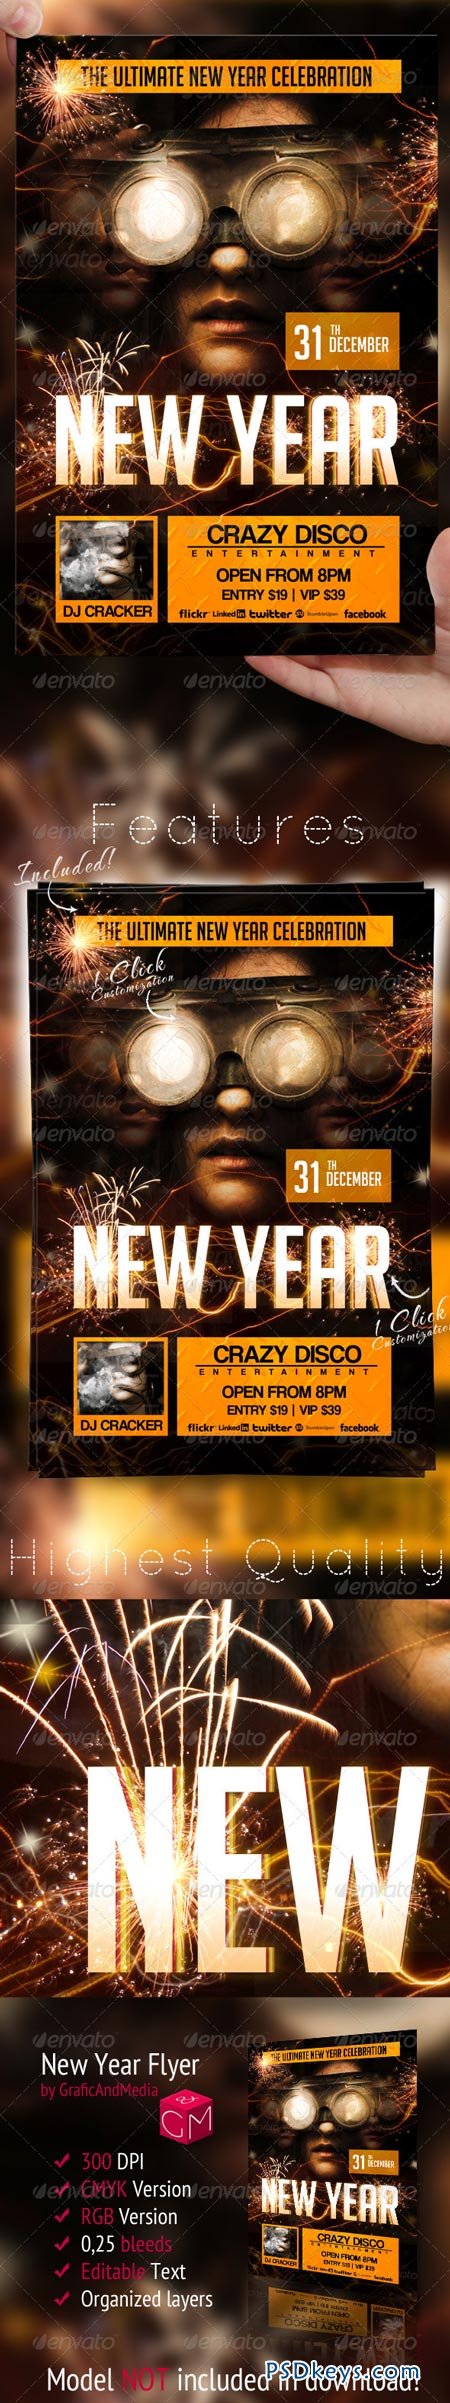 new-year-flyer-template-3093241-free-download-photoshop-vector-stock